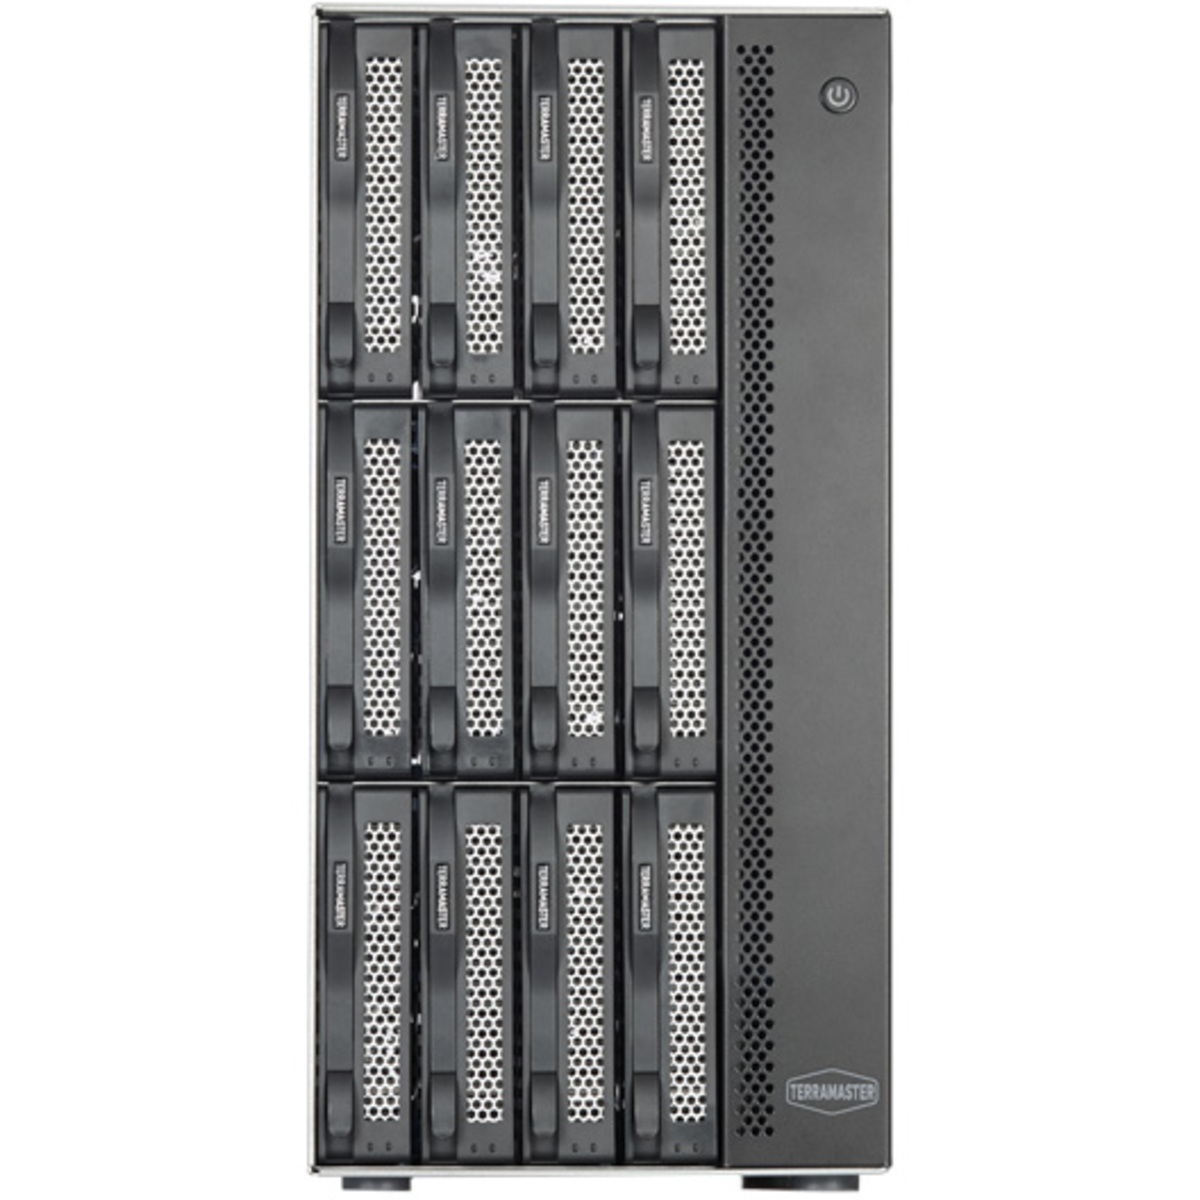 TerraMaster T12-450 4tb 12-Bay Desktop Multimedia / Power User / Business NAS - Network Attached Storage Device 8x500gb Sandisk Ultra 3D SDSSDH3-500G 2.5 560/520MB/s SATA 6Gb/s SSD CONSUMER Class Drives Installed - Burn-In Tested T12-450